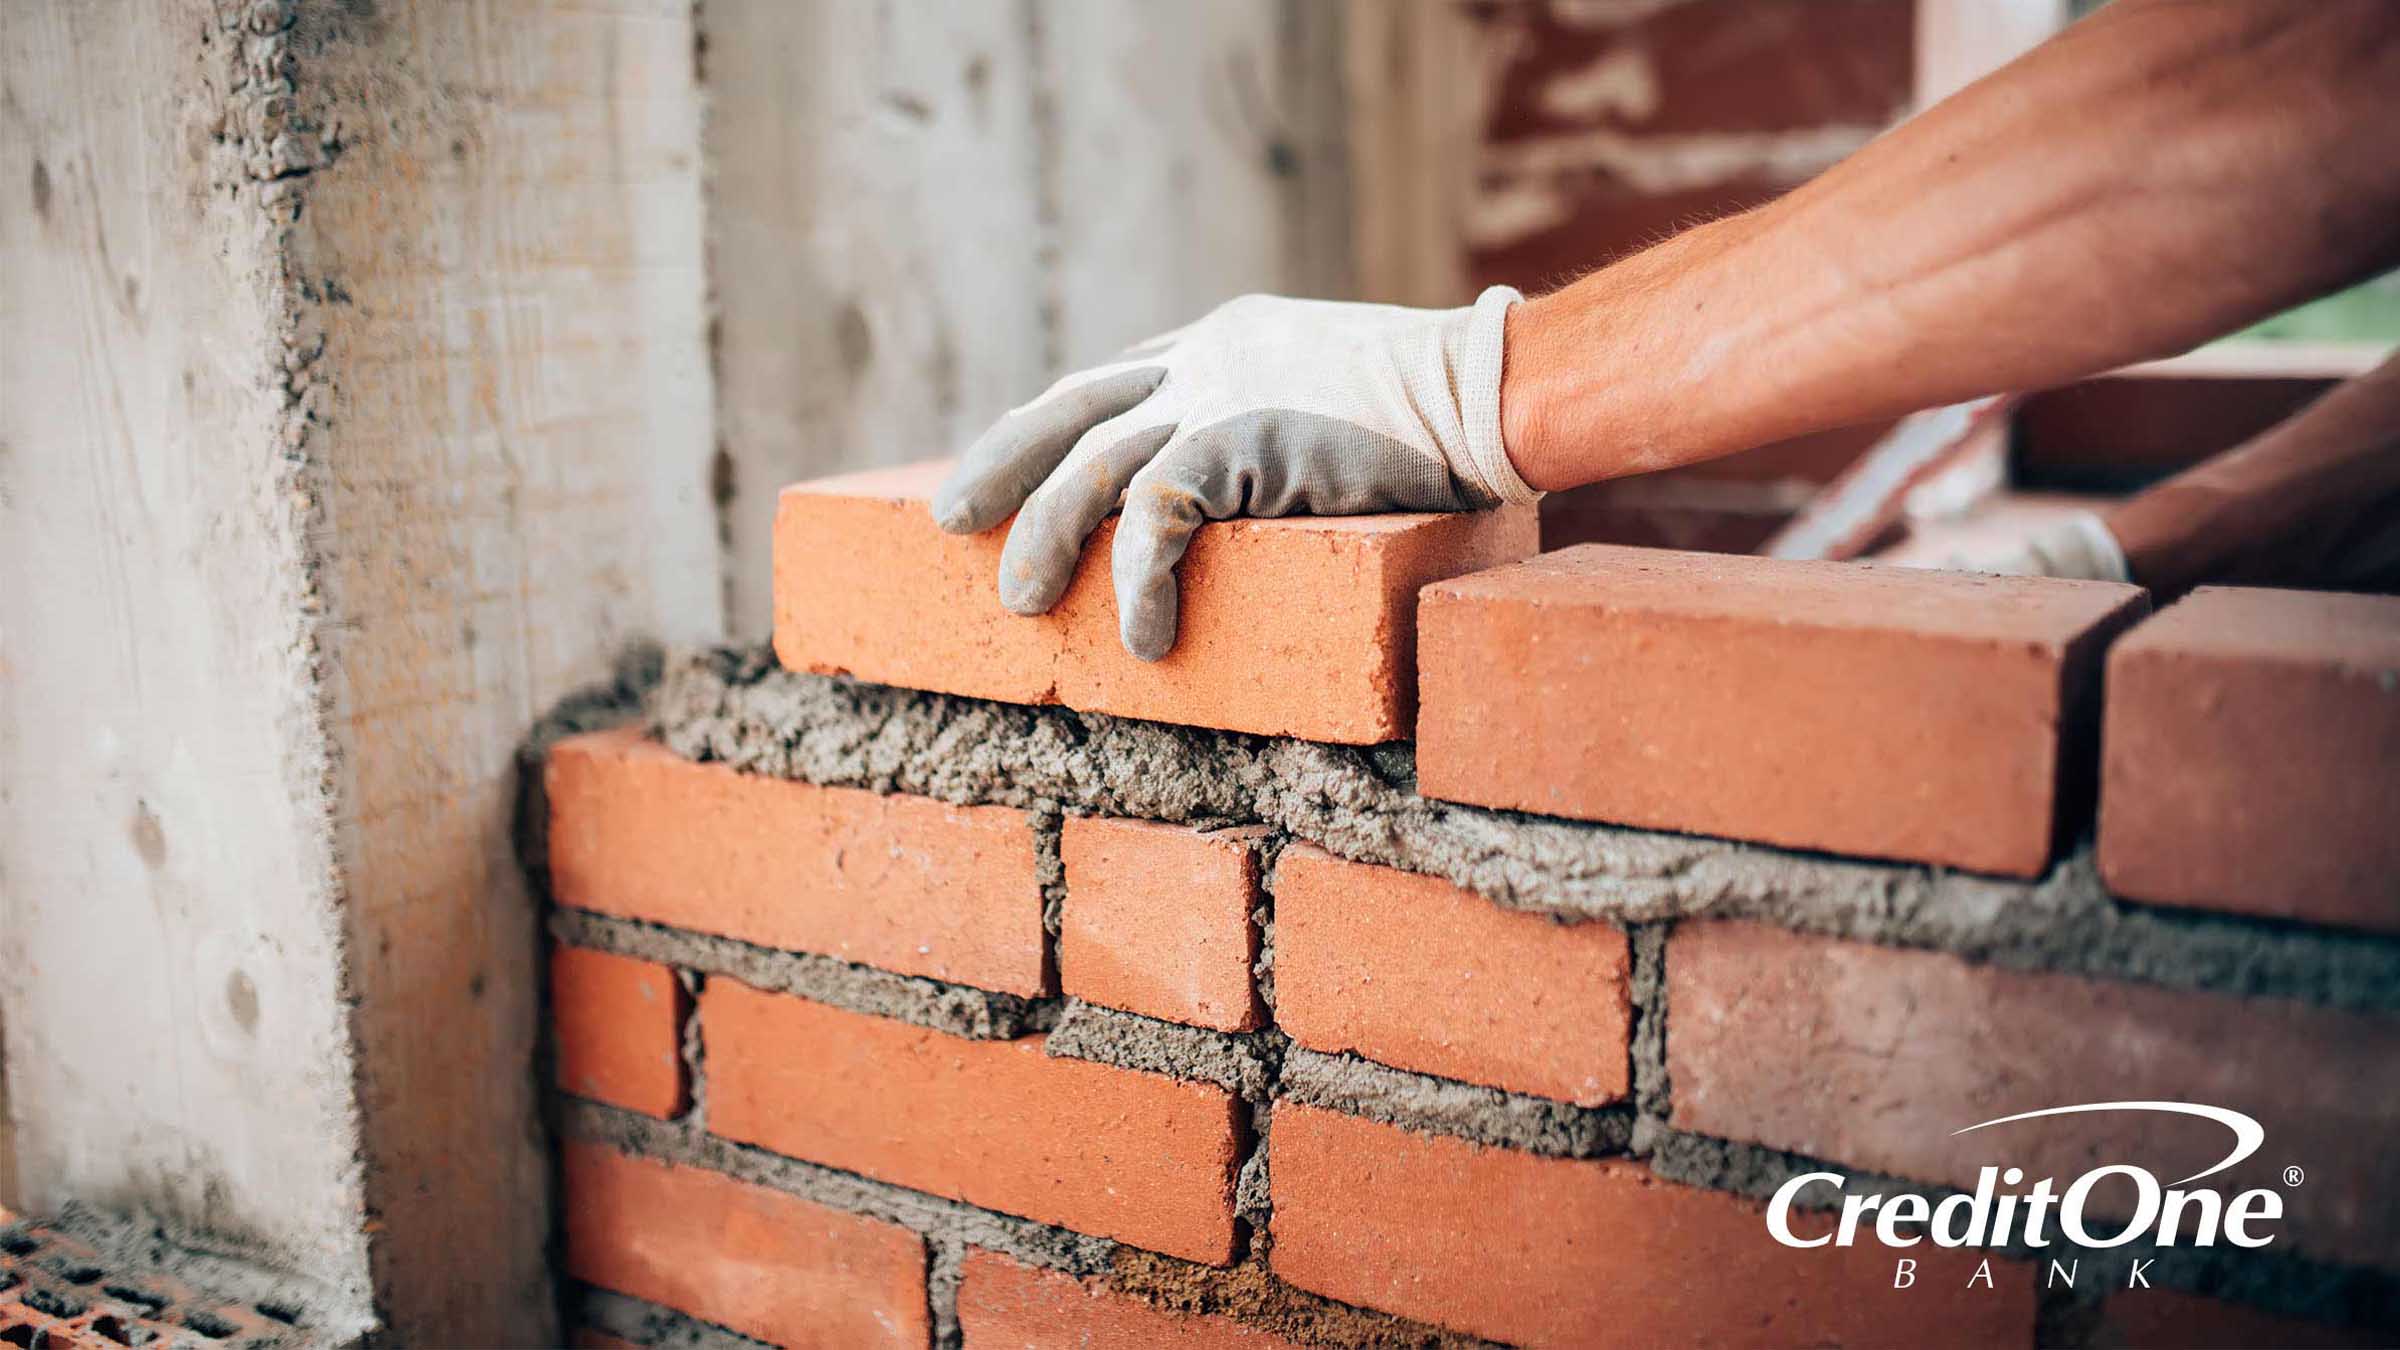 Building a solid credit foundation brick by brick